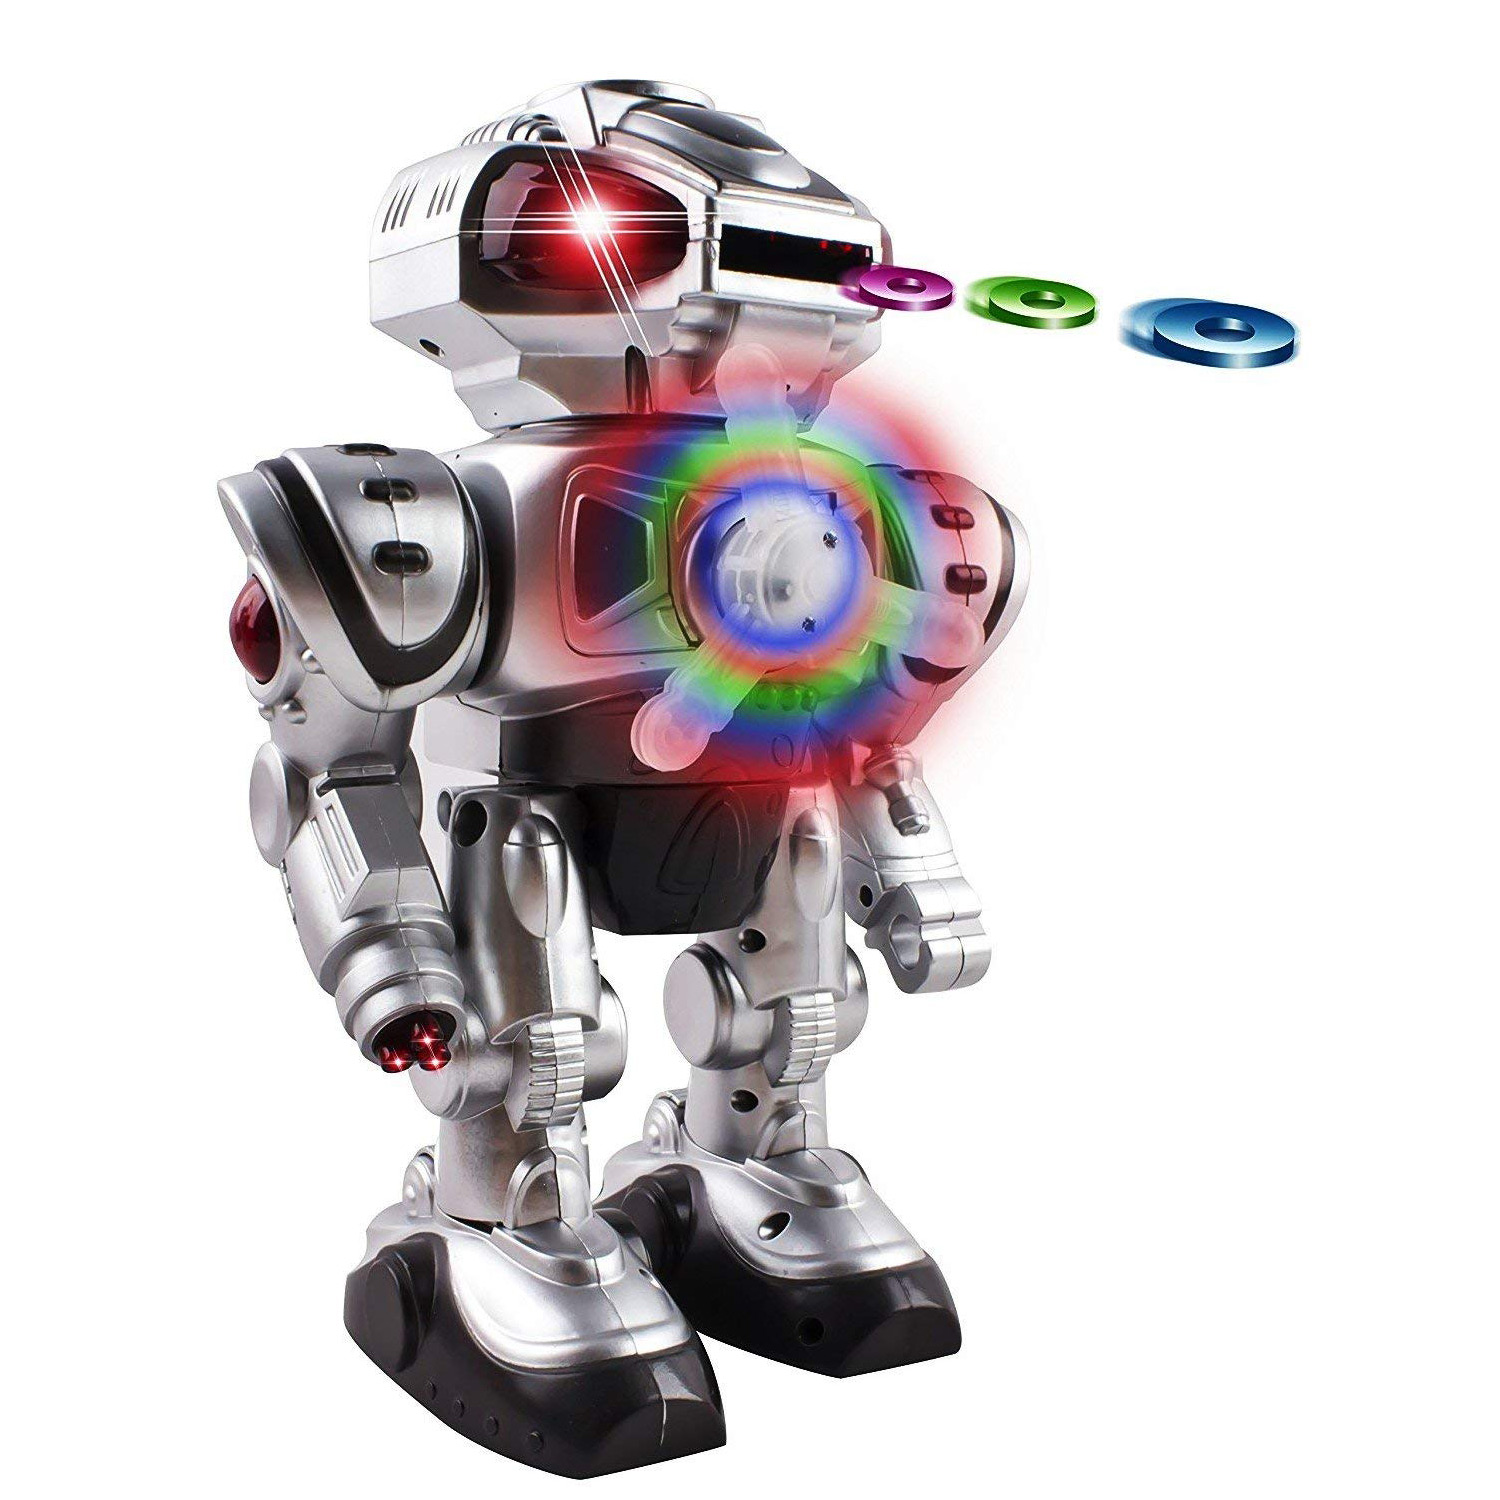 Super Android Toy Robot With Disc Shooting Walking Flashing Lights And Sound Features Great Action Toy For Kids Boys Girls Toddlers Battery Operated Silver